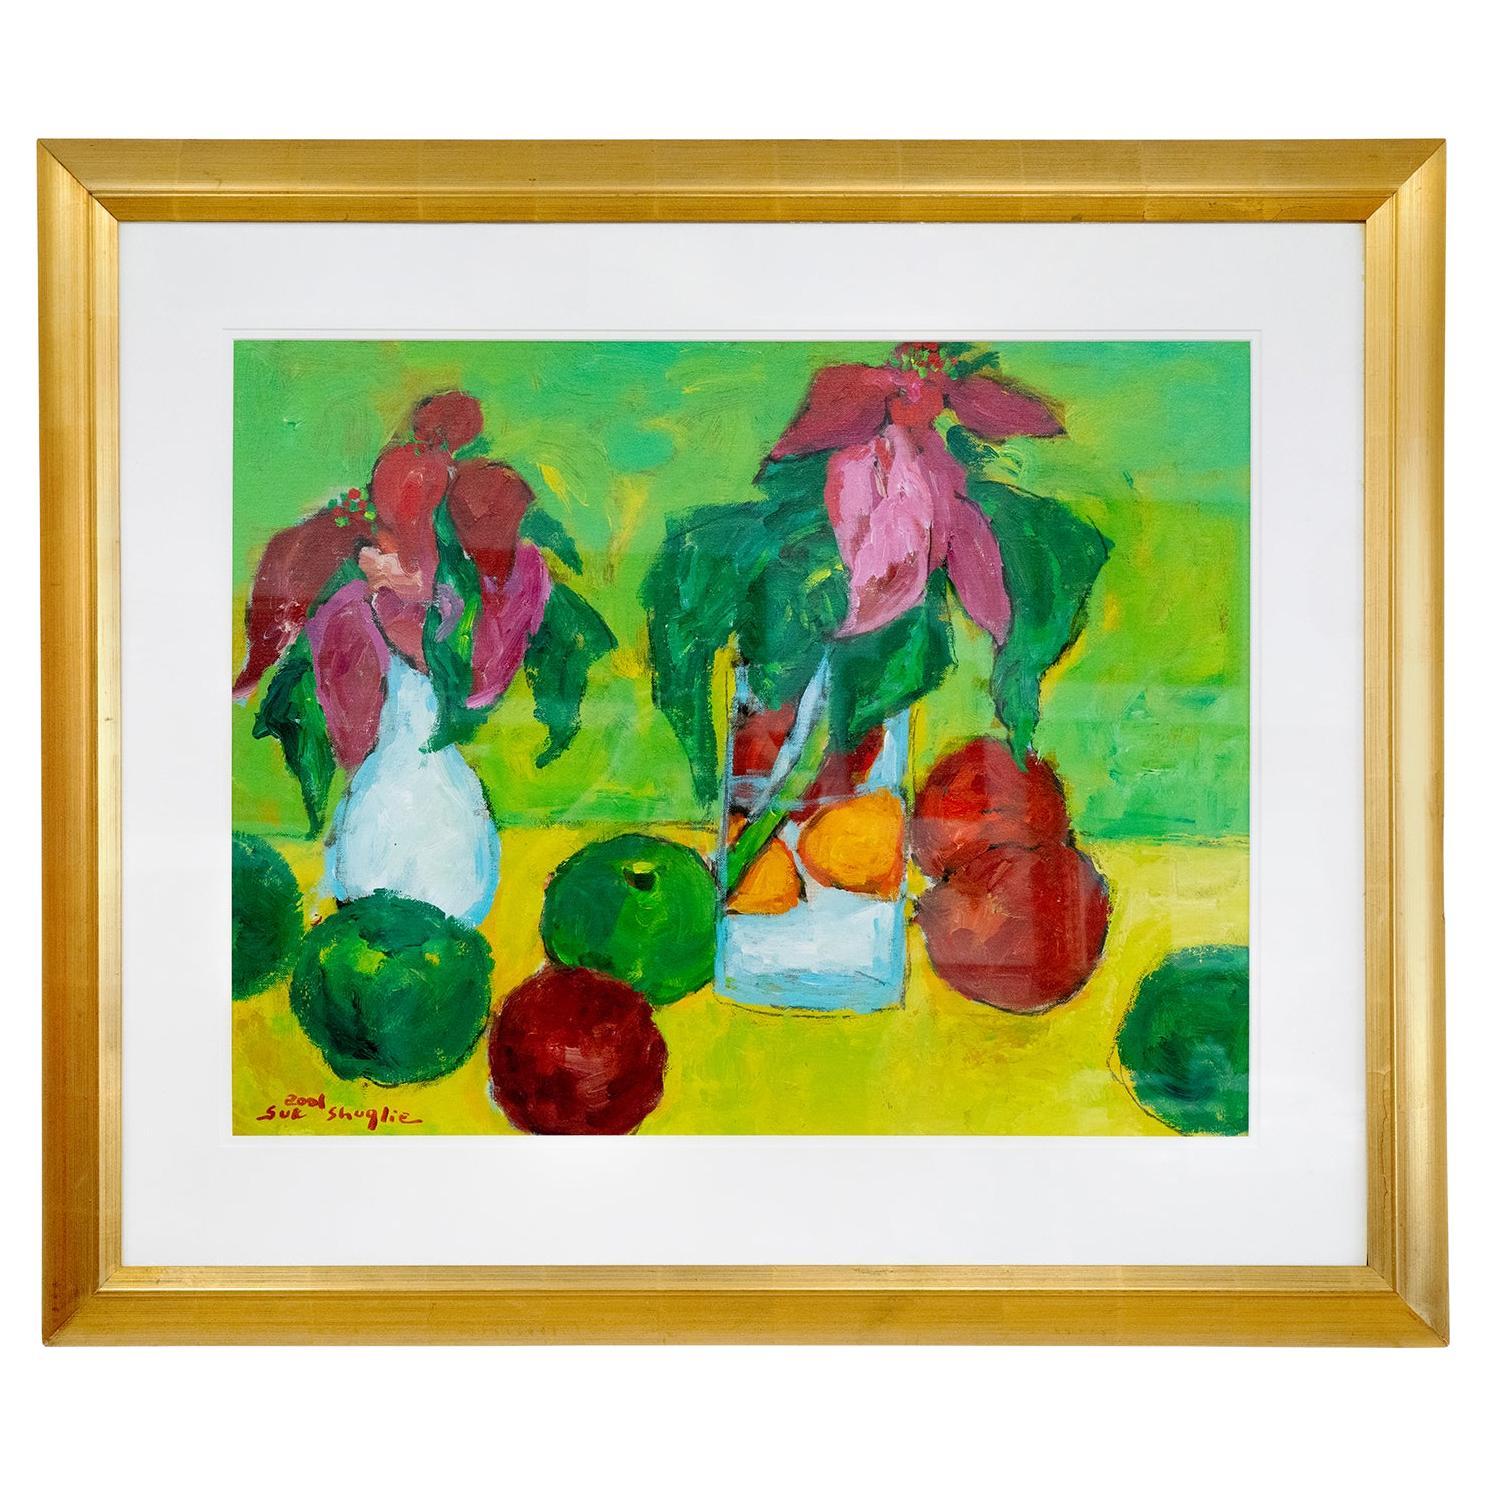 Suk Shuglie's Painting "Poinsettias and Apples" For Sale